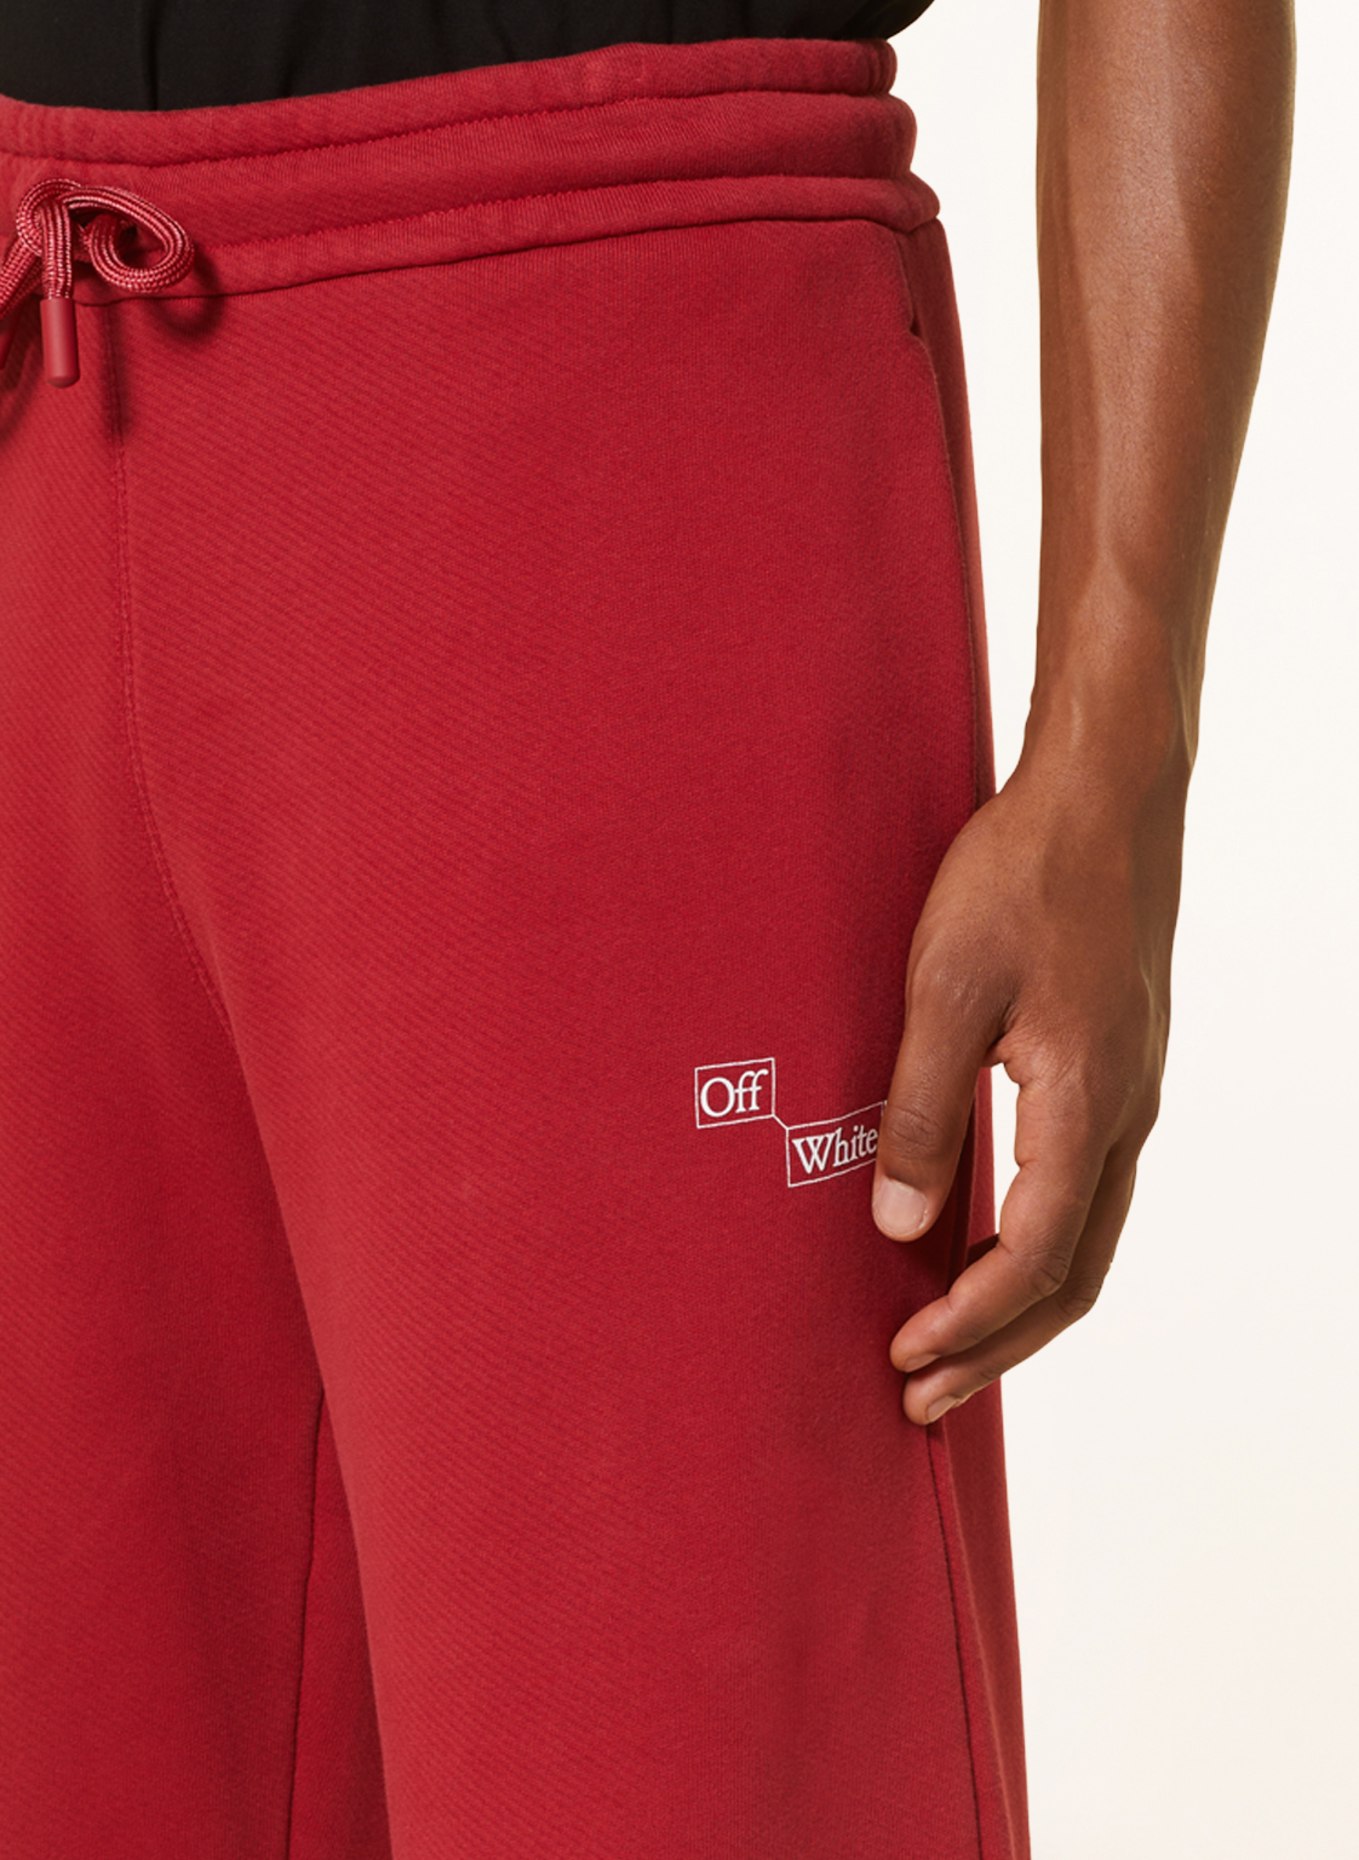 Off-White Pants in jogger style, Color: RED (Image 5)